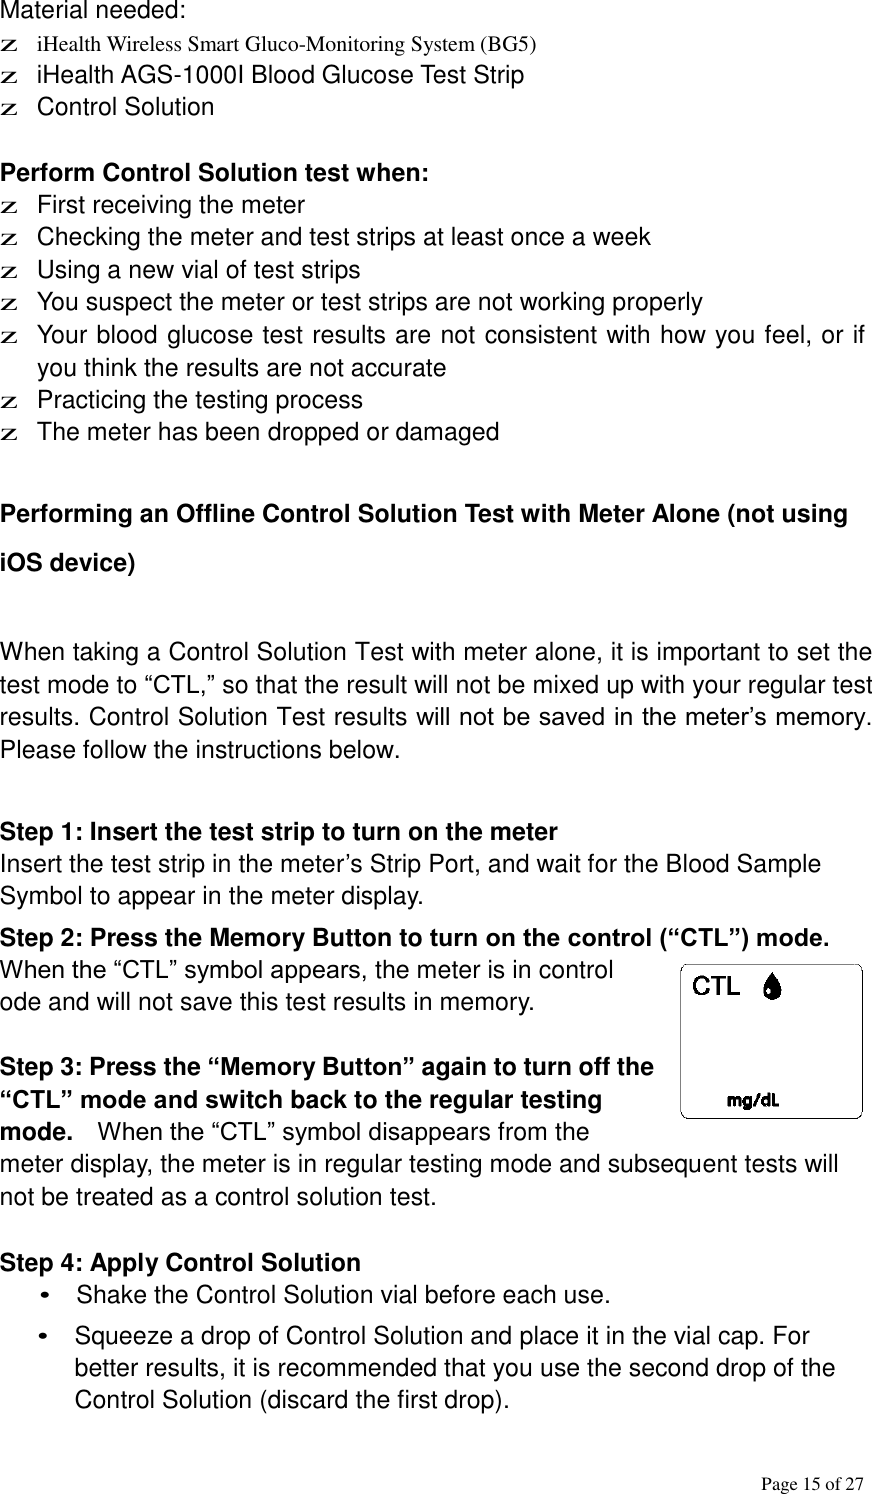 Page 15 of 27    Material needed: z iHealth Wireless Smart Gluco-Monitoring System (BG5) z iHealth AGS-1000I Blood Glucose Test Strip z Control Solution   Perform Control Solution test when: z First receiving the meter z Checking the meter and test strips at least once a week z Using a new vial of test strips z You suspect the meter or test strips are not working properly z Your blood glucose test results are not consistent with how you feel, or if you think the results are not accurate z Practicing the testing process z The meter has been dropped or damaged    Performing an Offline Control Solution Test with Meter Alone (not using iOS device)   When taking a Control Solution Test with meter alone, it is important to set the test mode to “CTL,” so that the result will not be mixed up with your regular test results. Control Solution Test results will not be saved in the meter’s memory. Please follow the instructions below.   Step 1: Insert the test strip to turn on the meter Insert the test strip in the meter’s Strip Port, and wait for the Blood Sample Symbol to appear in the meter display.  Step 2: Press the Memory Button to turn on the control (“CTL”) mode. When the “CTL” symbol appears, the meter is in control ode and will not save this test results in memory.   Step 3: Press the “Memory Button” again to turn off the “CTL” mode and switch back to the regular testing mode.  When the “CTL” symbol disappears from the meter display, the meter is in regular testing mode and subsequent tests will not be treated as a control solution test.   Step 4: Apply Control Solution • Shake the Control Solution vial before each use.  • Squeeze a drop of Control Solution and place it in the vial cap. For better results, it is recommended that you use the second drop of the Control Solution (discard the first drop). 